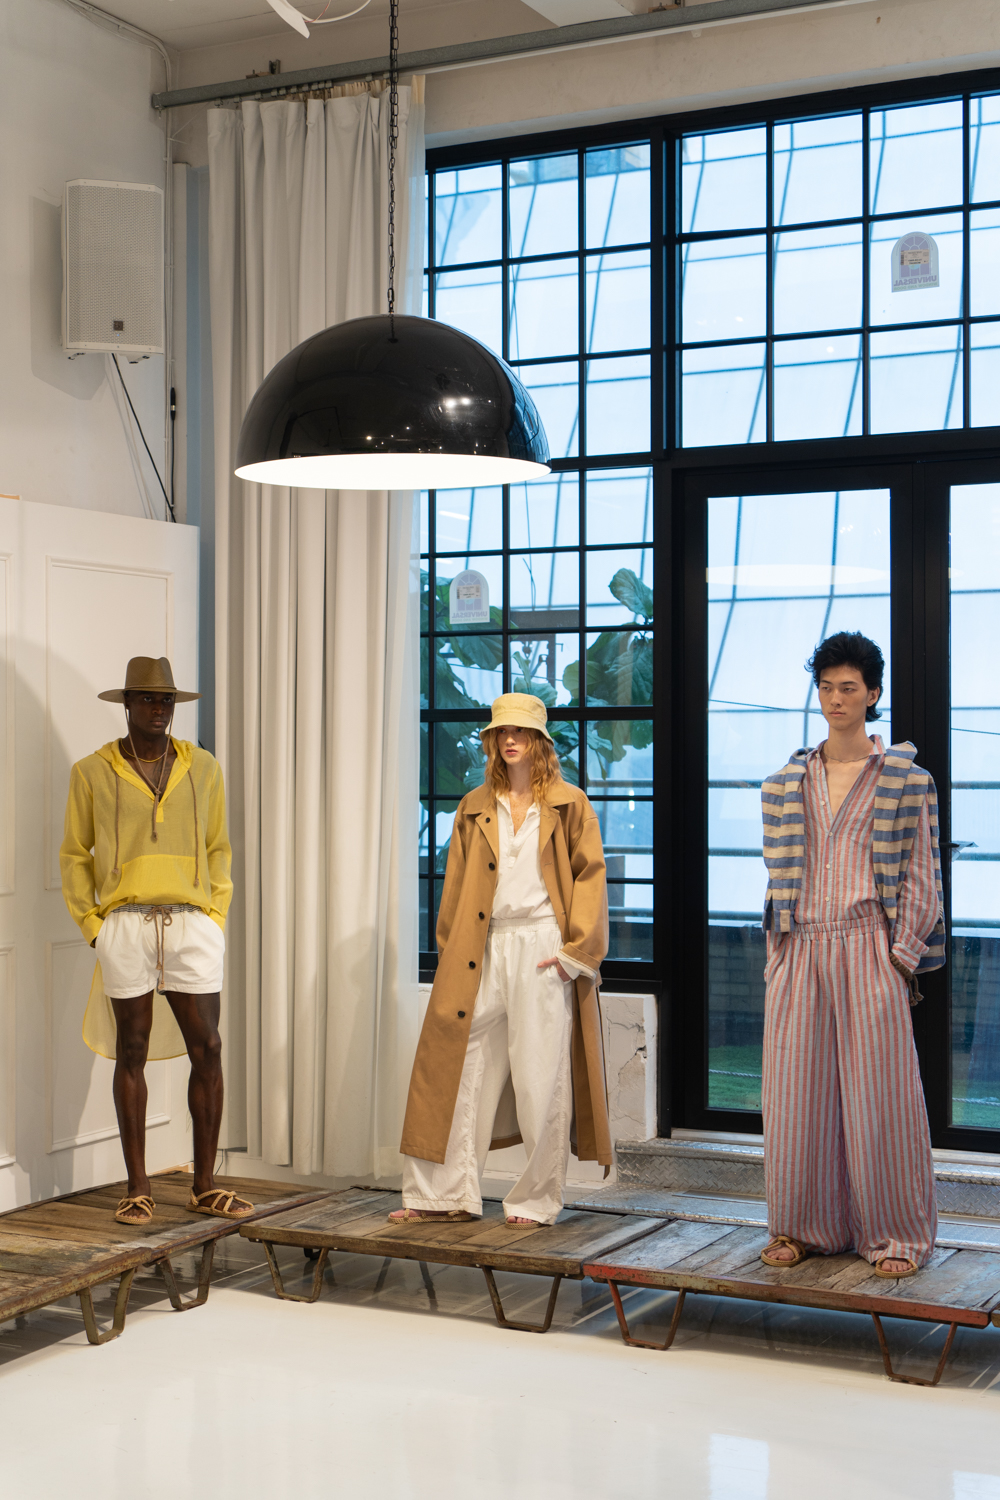 Three models stand in a fashion showroom with white walls and floor-to-ceiling windows. They are wearing clothing from the brand thesalting and are standing on wooden cargo racks.